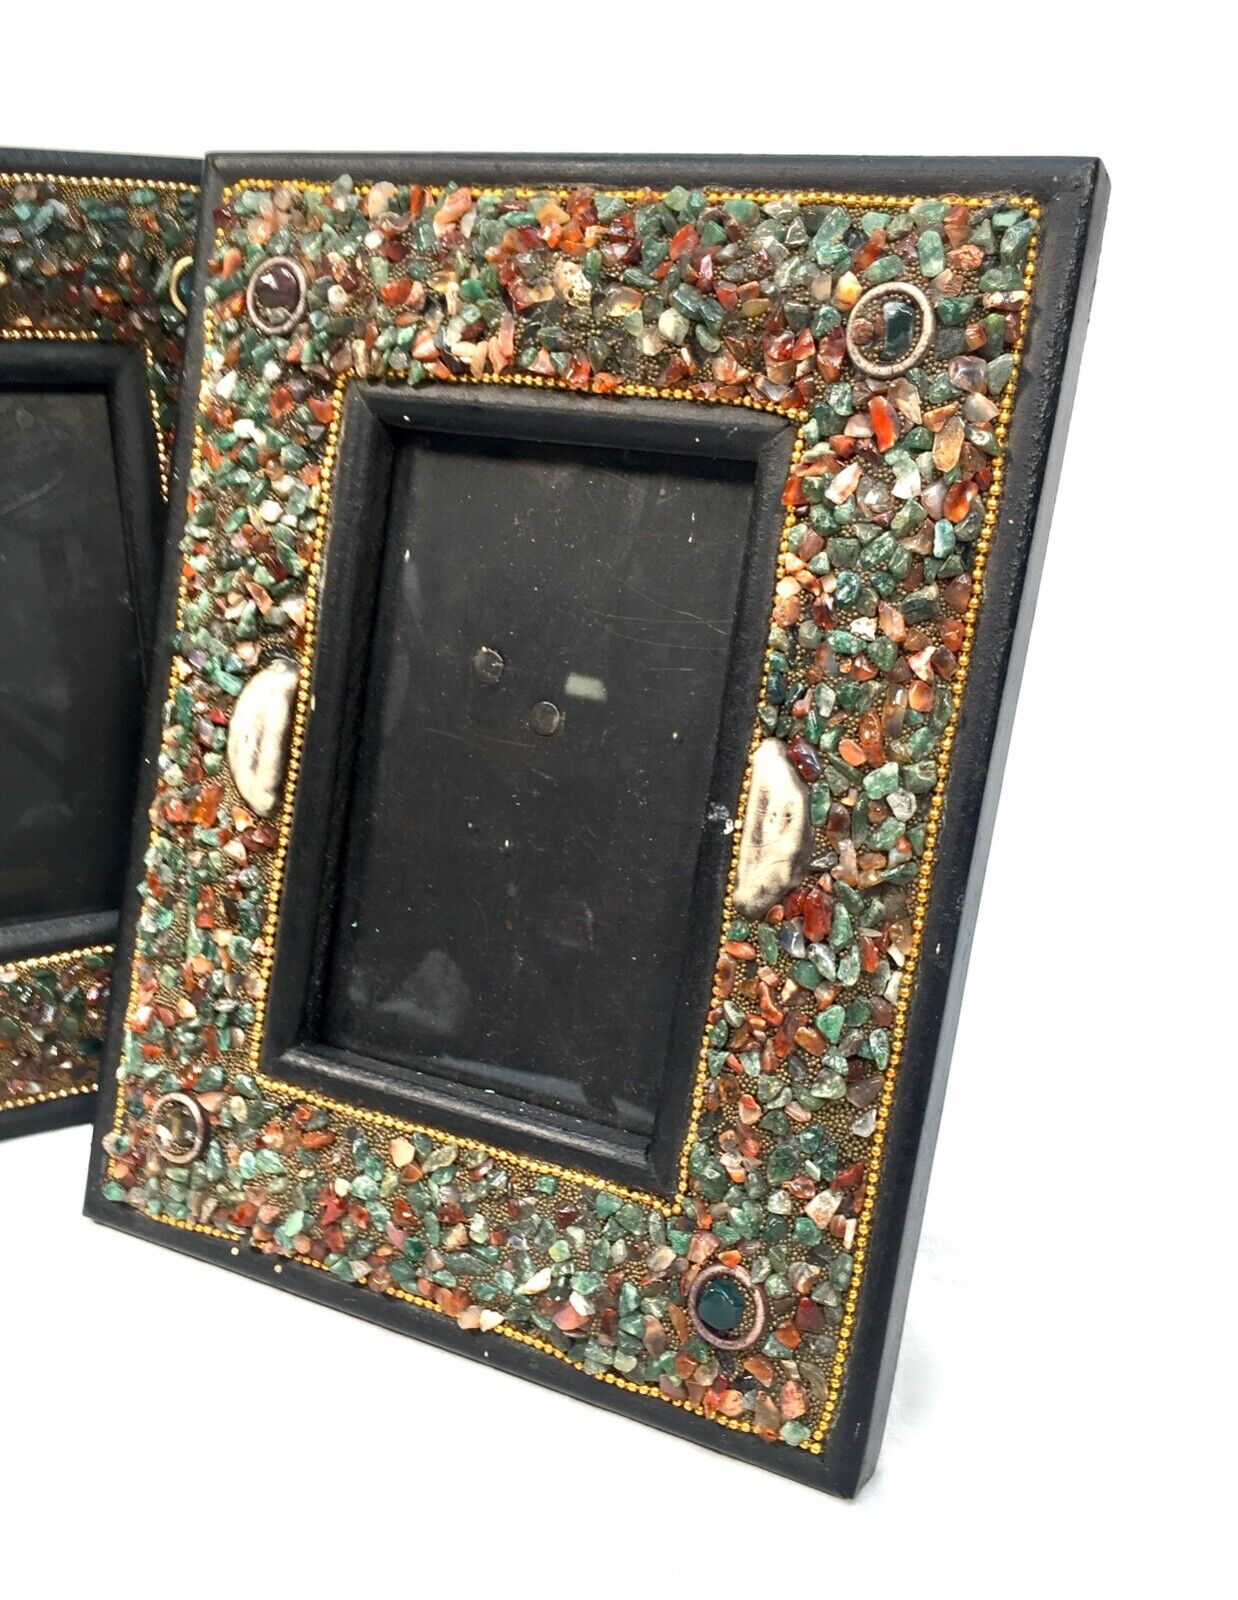 Vintage Pair of Matching Photo Frames with Hard Stone / Crystal Surrounds